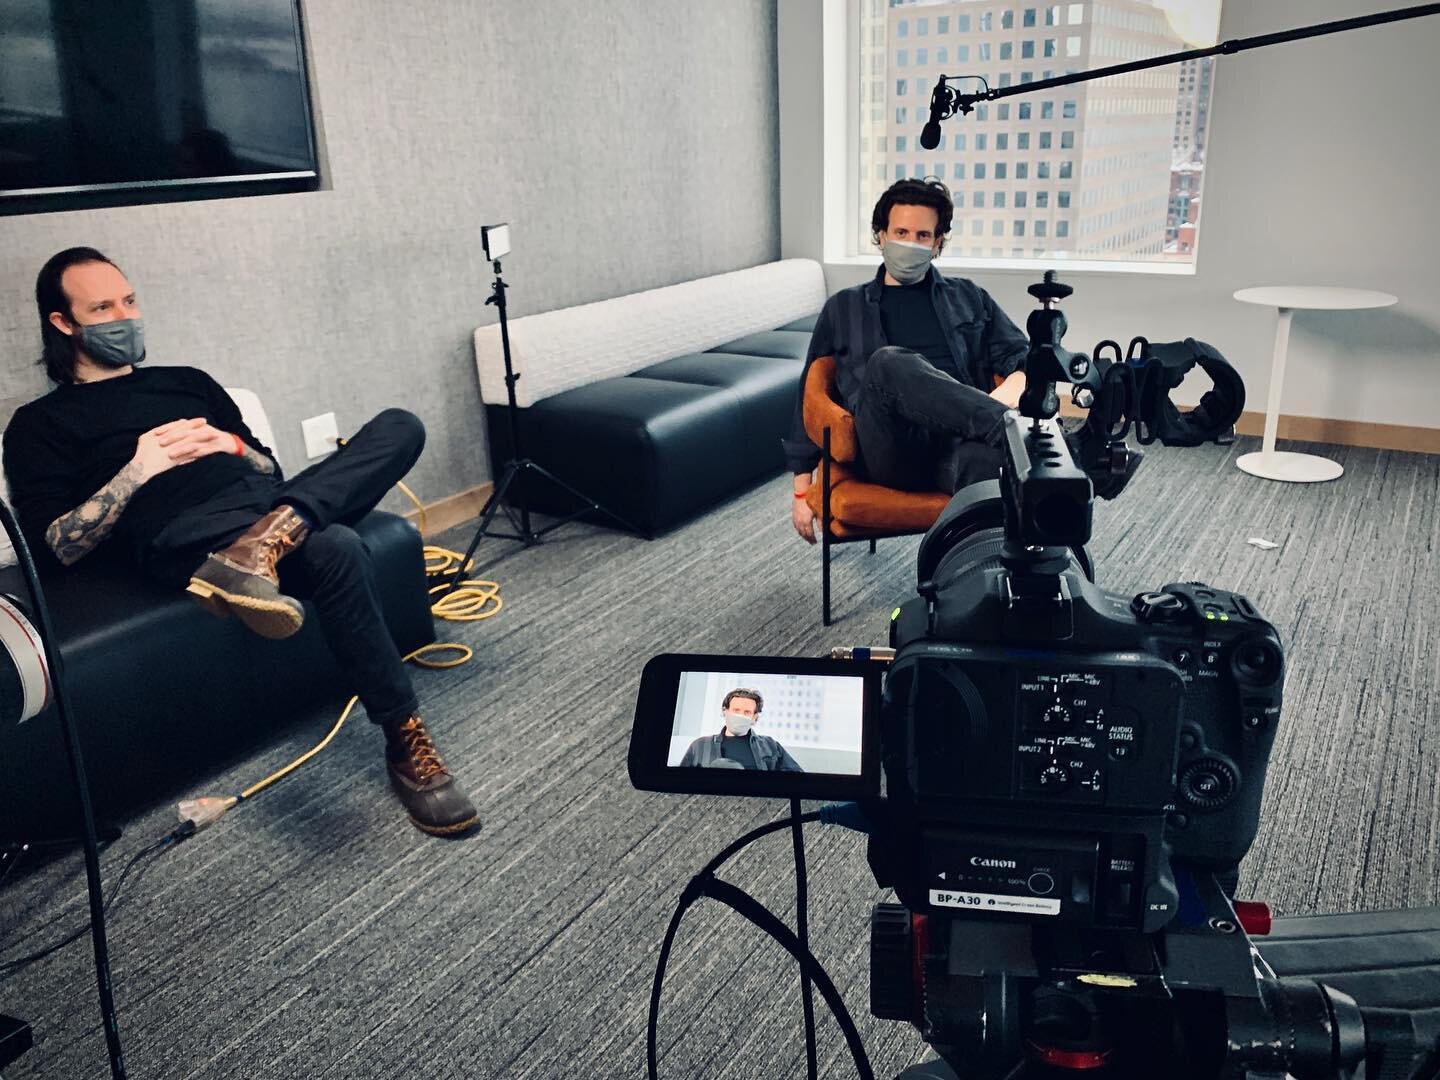 Camera testing at the @jcrew offices, NYC. Winter filming with a relaxed mood is good. #JCrew #VideoProduction
.
.
.
.
#IfTheseBoysCouldTalk
@bellurypants @matteolibb
📸 @jpgannon #NYC